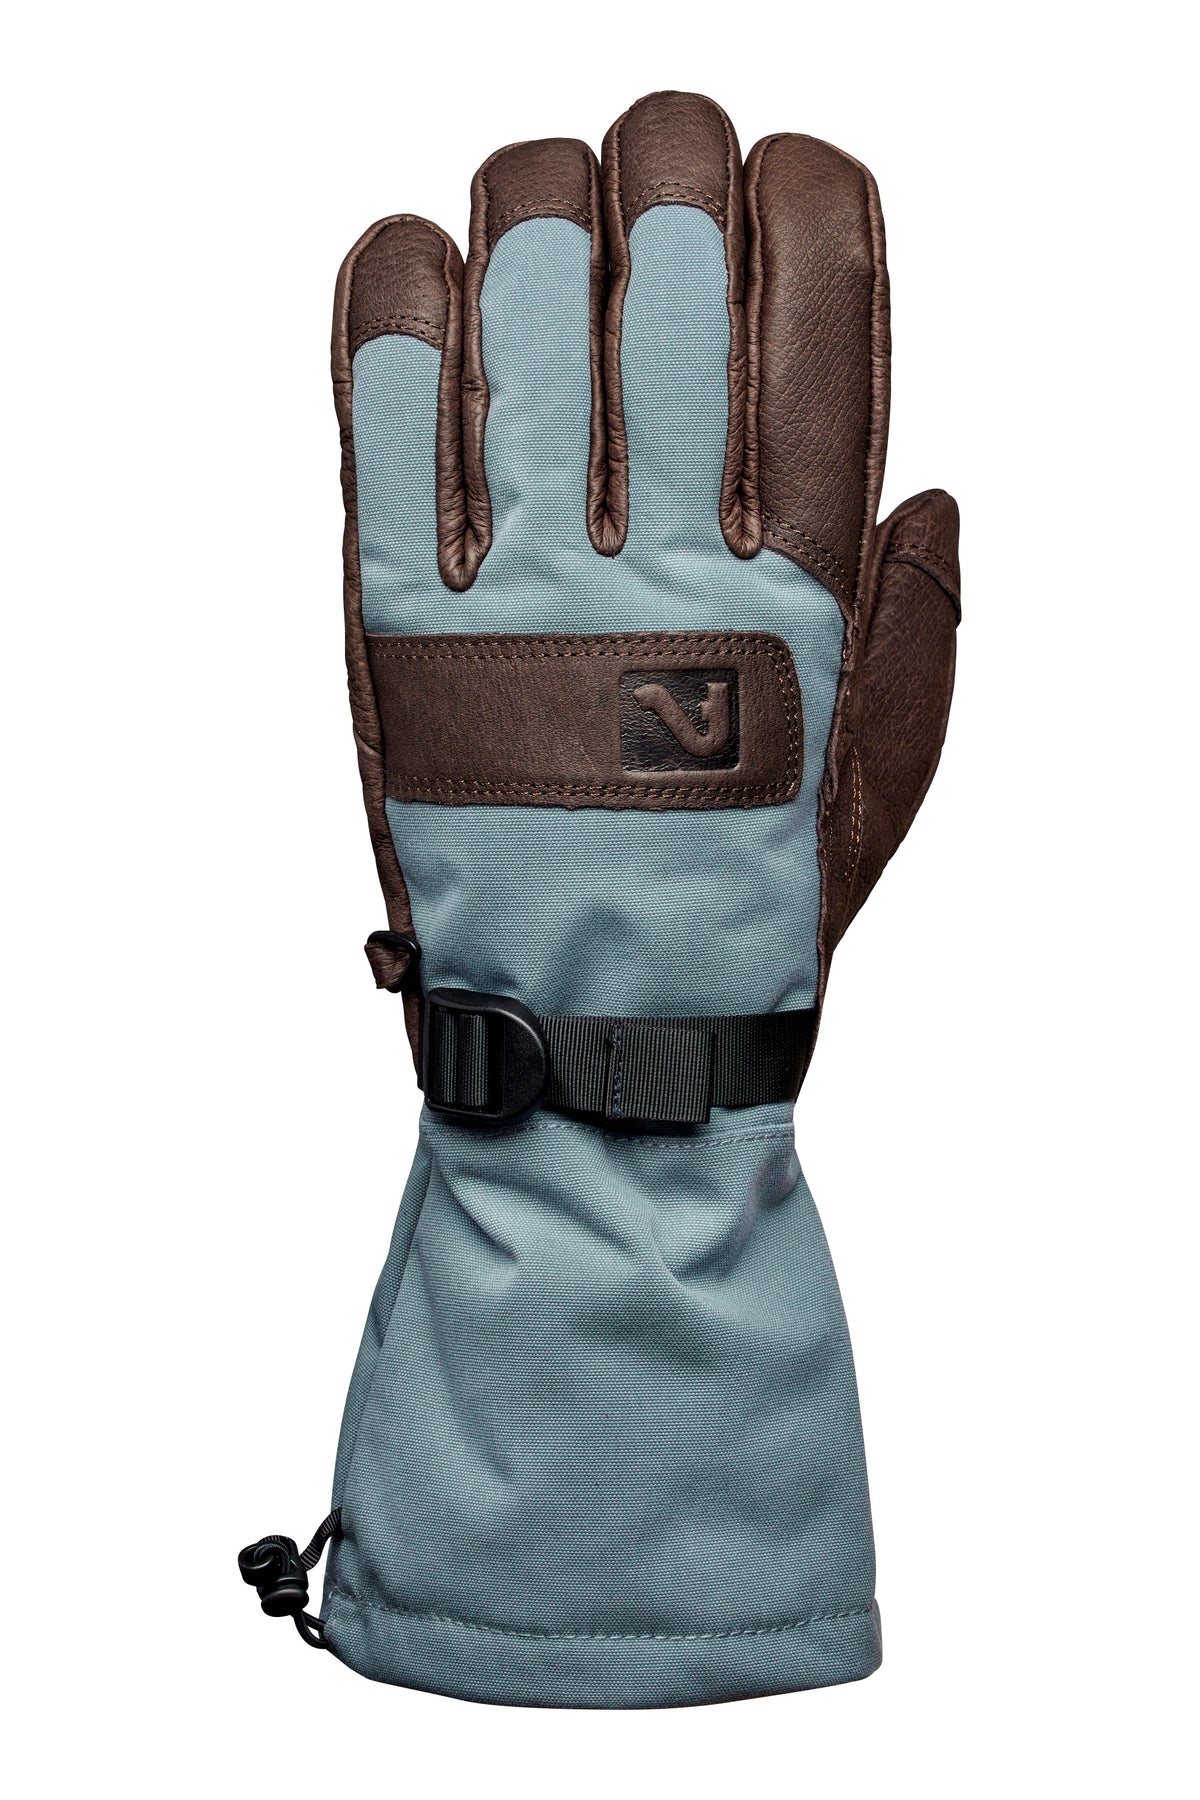 Flow Womens Snow Gloves - Charcoal